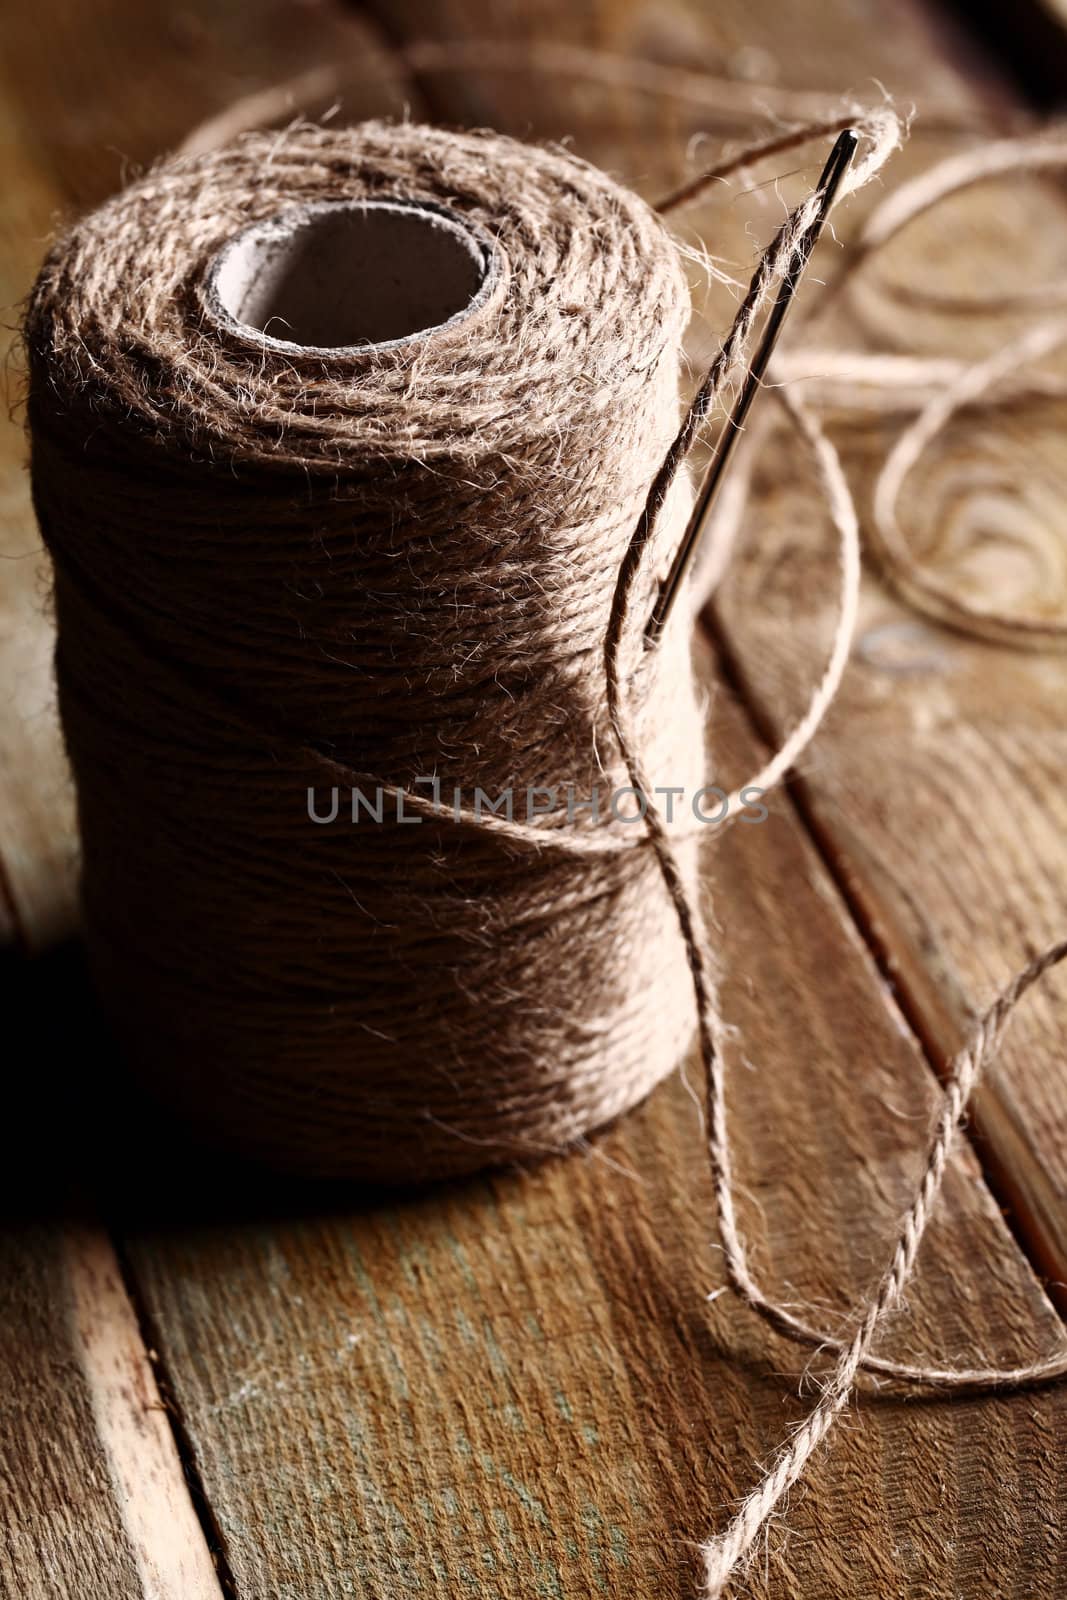 Artistic image of spool of thread and needle over wooden surface